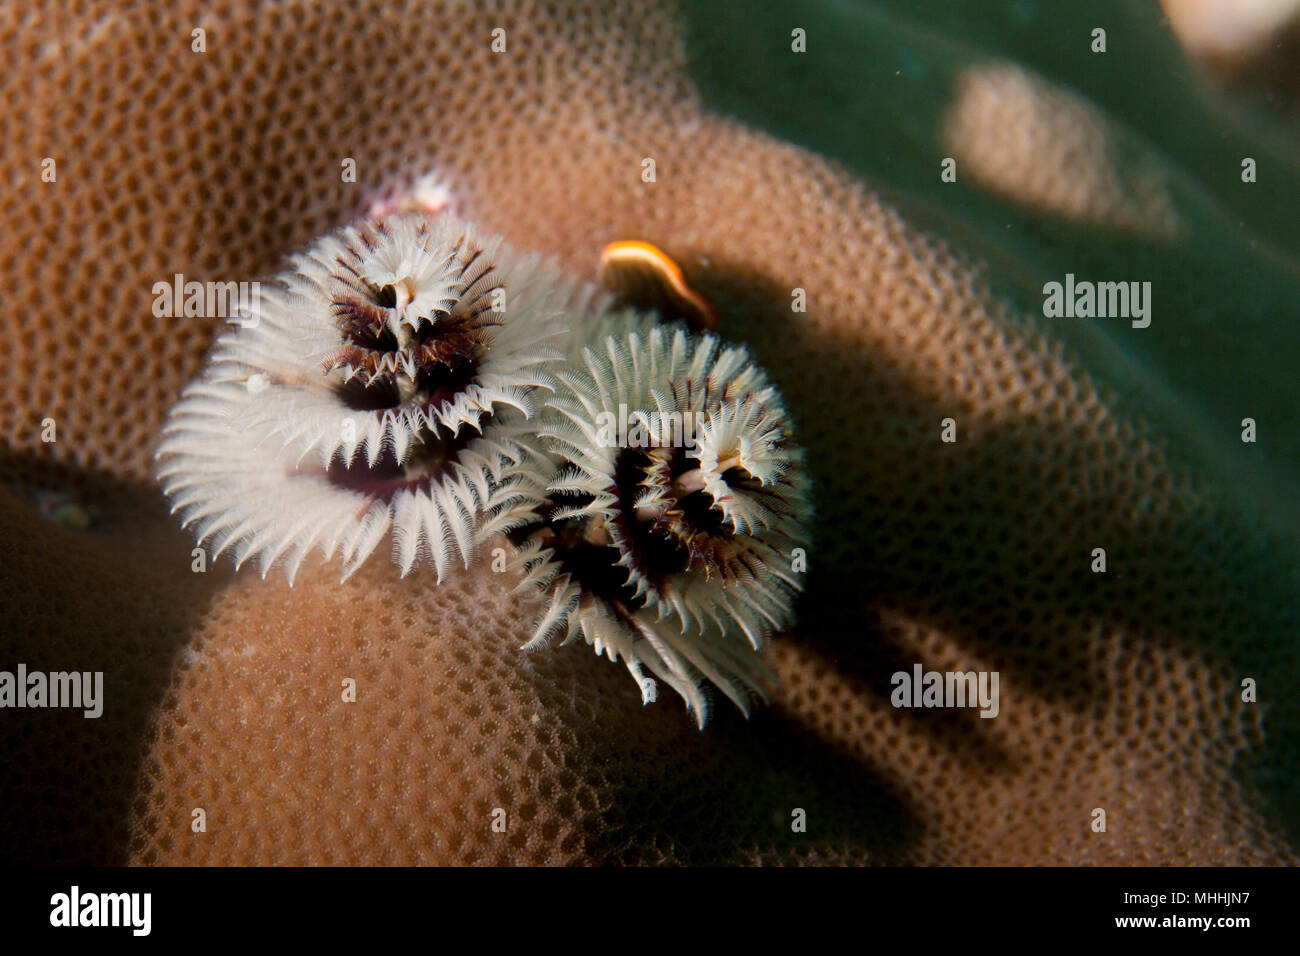 A Xmas tree worm in hard coral in Raja Ampat Papua, Indonesia Stock Photo